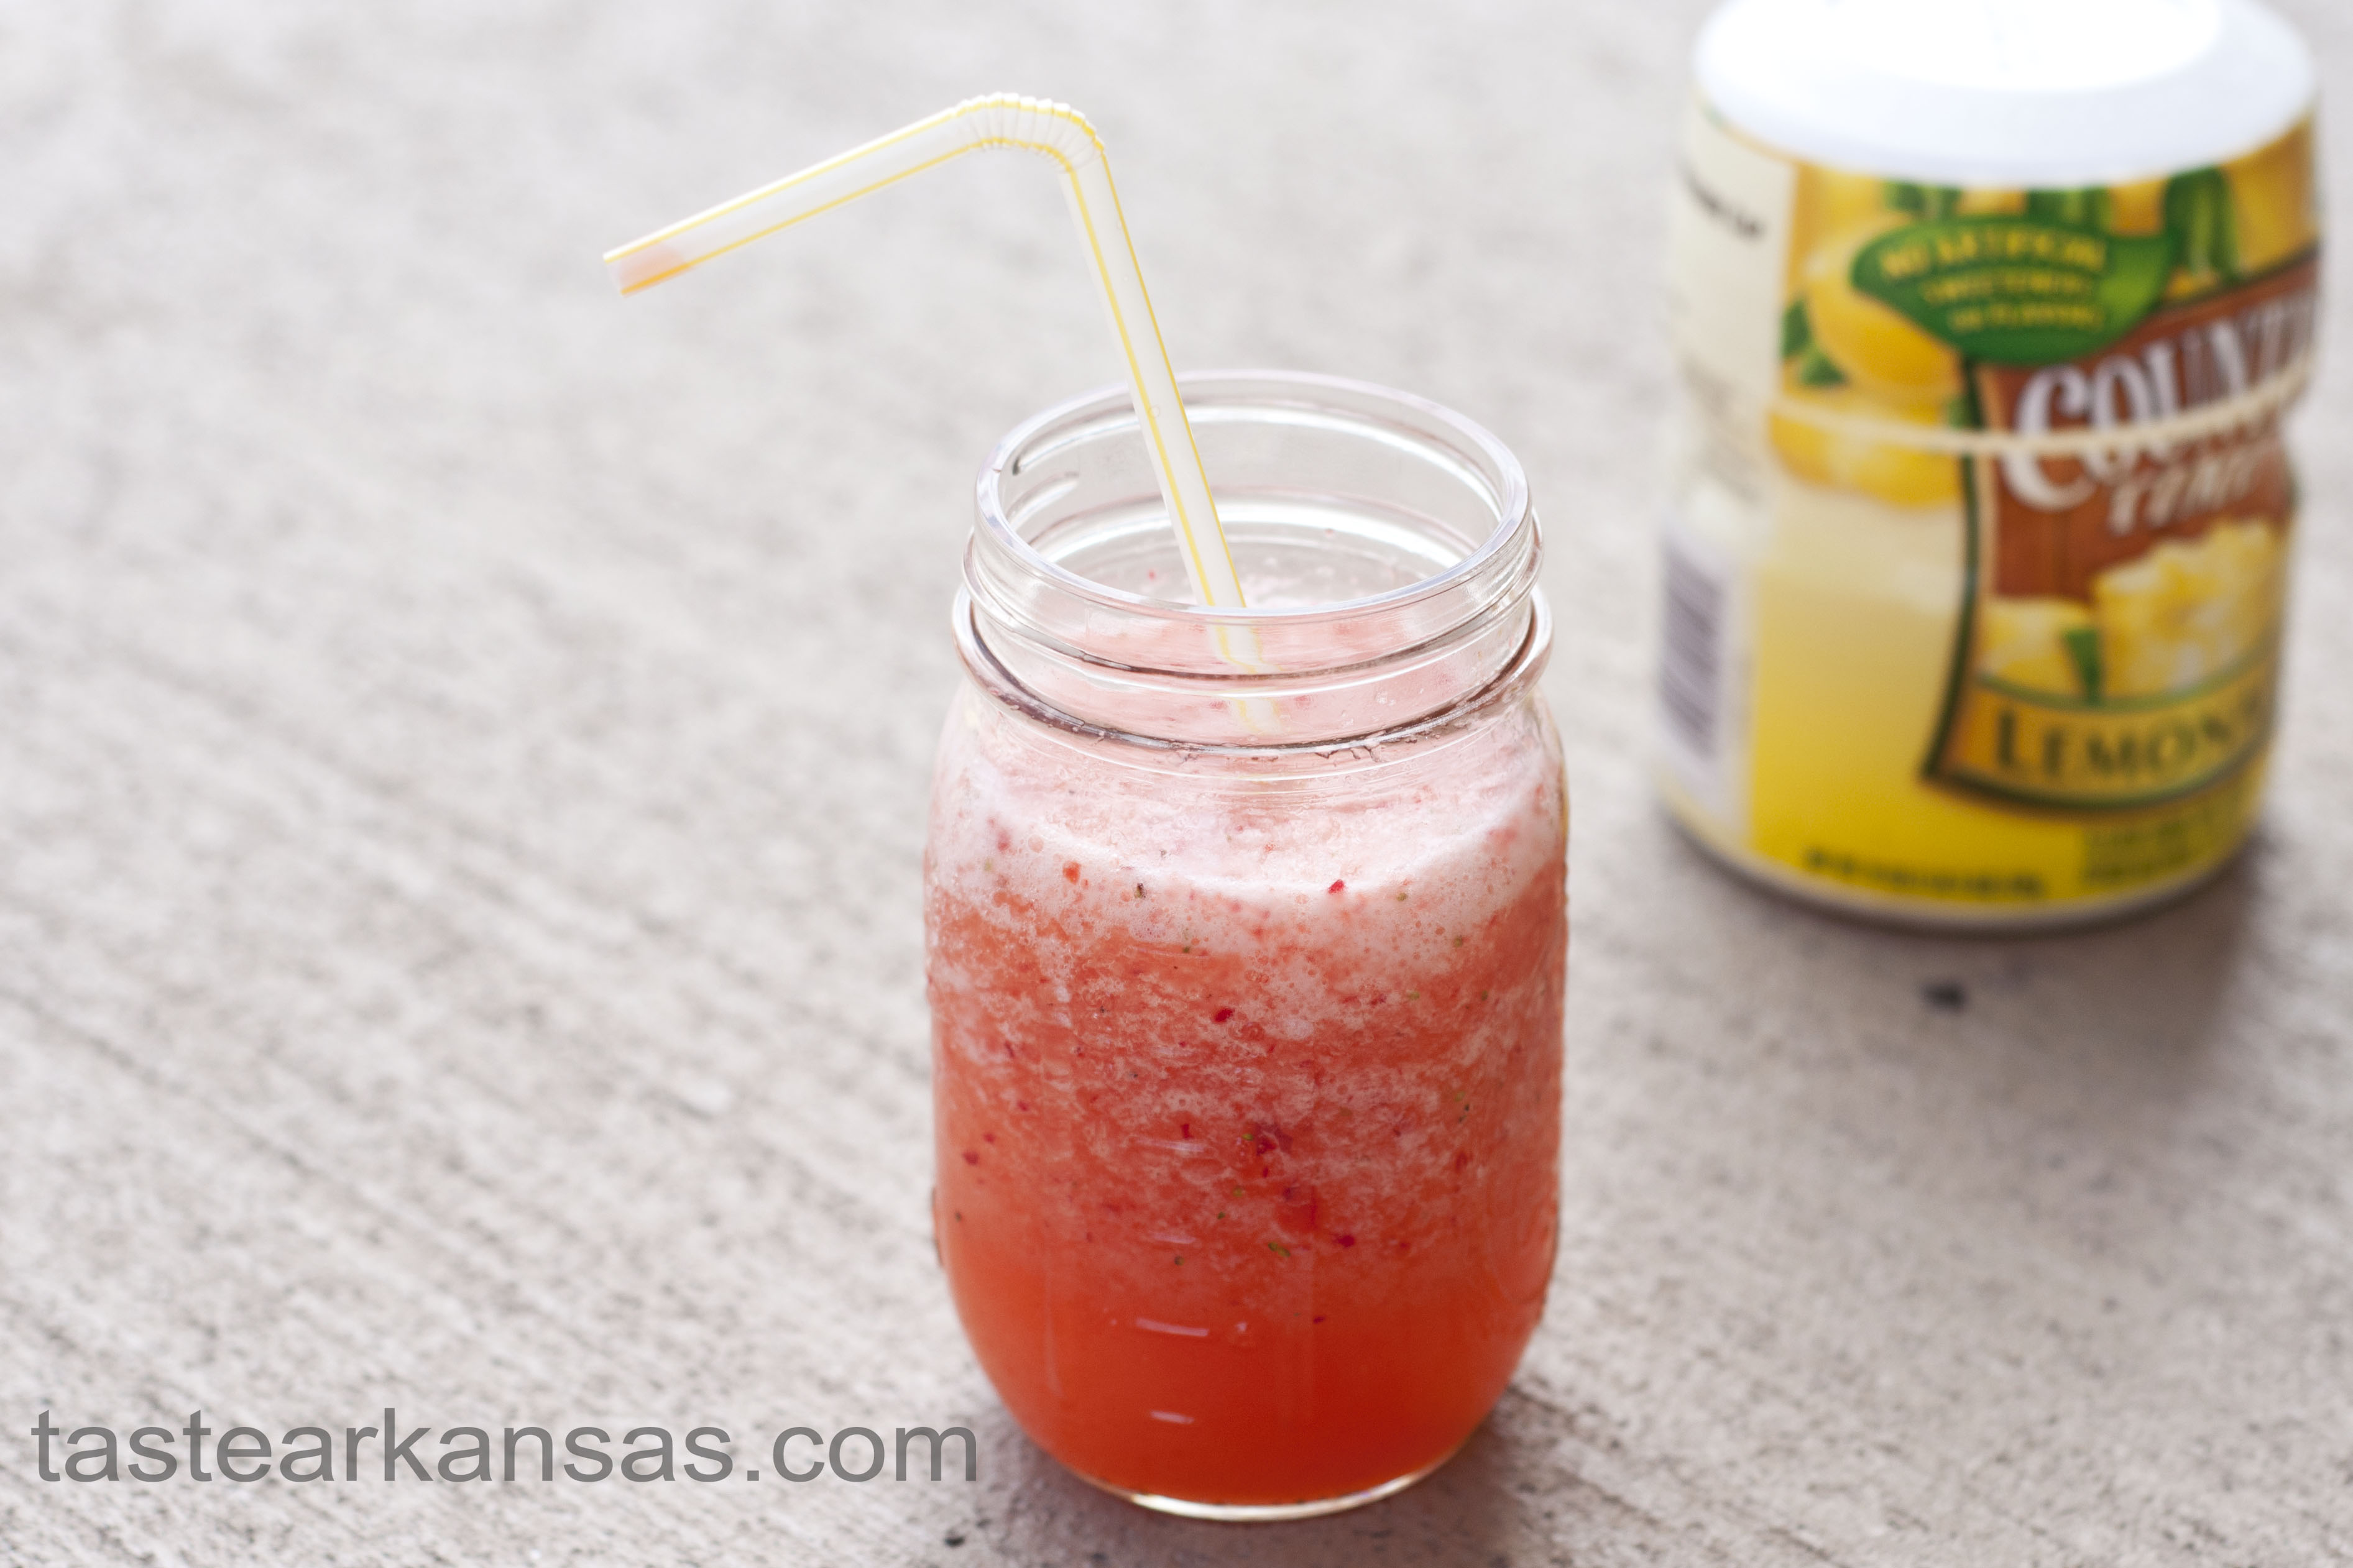 this photo is of strawberry lemonade slush in a mason jar with a straw and a container of countrytime lemonade in the background